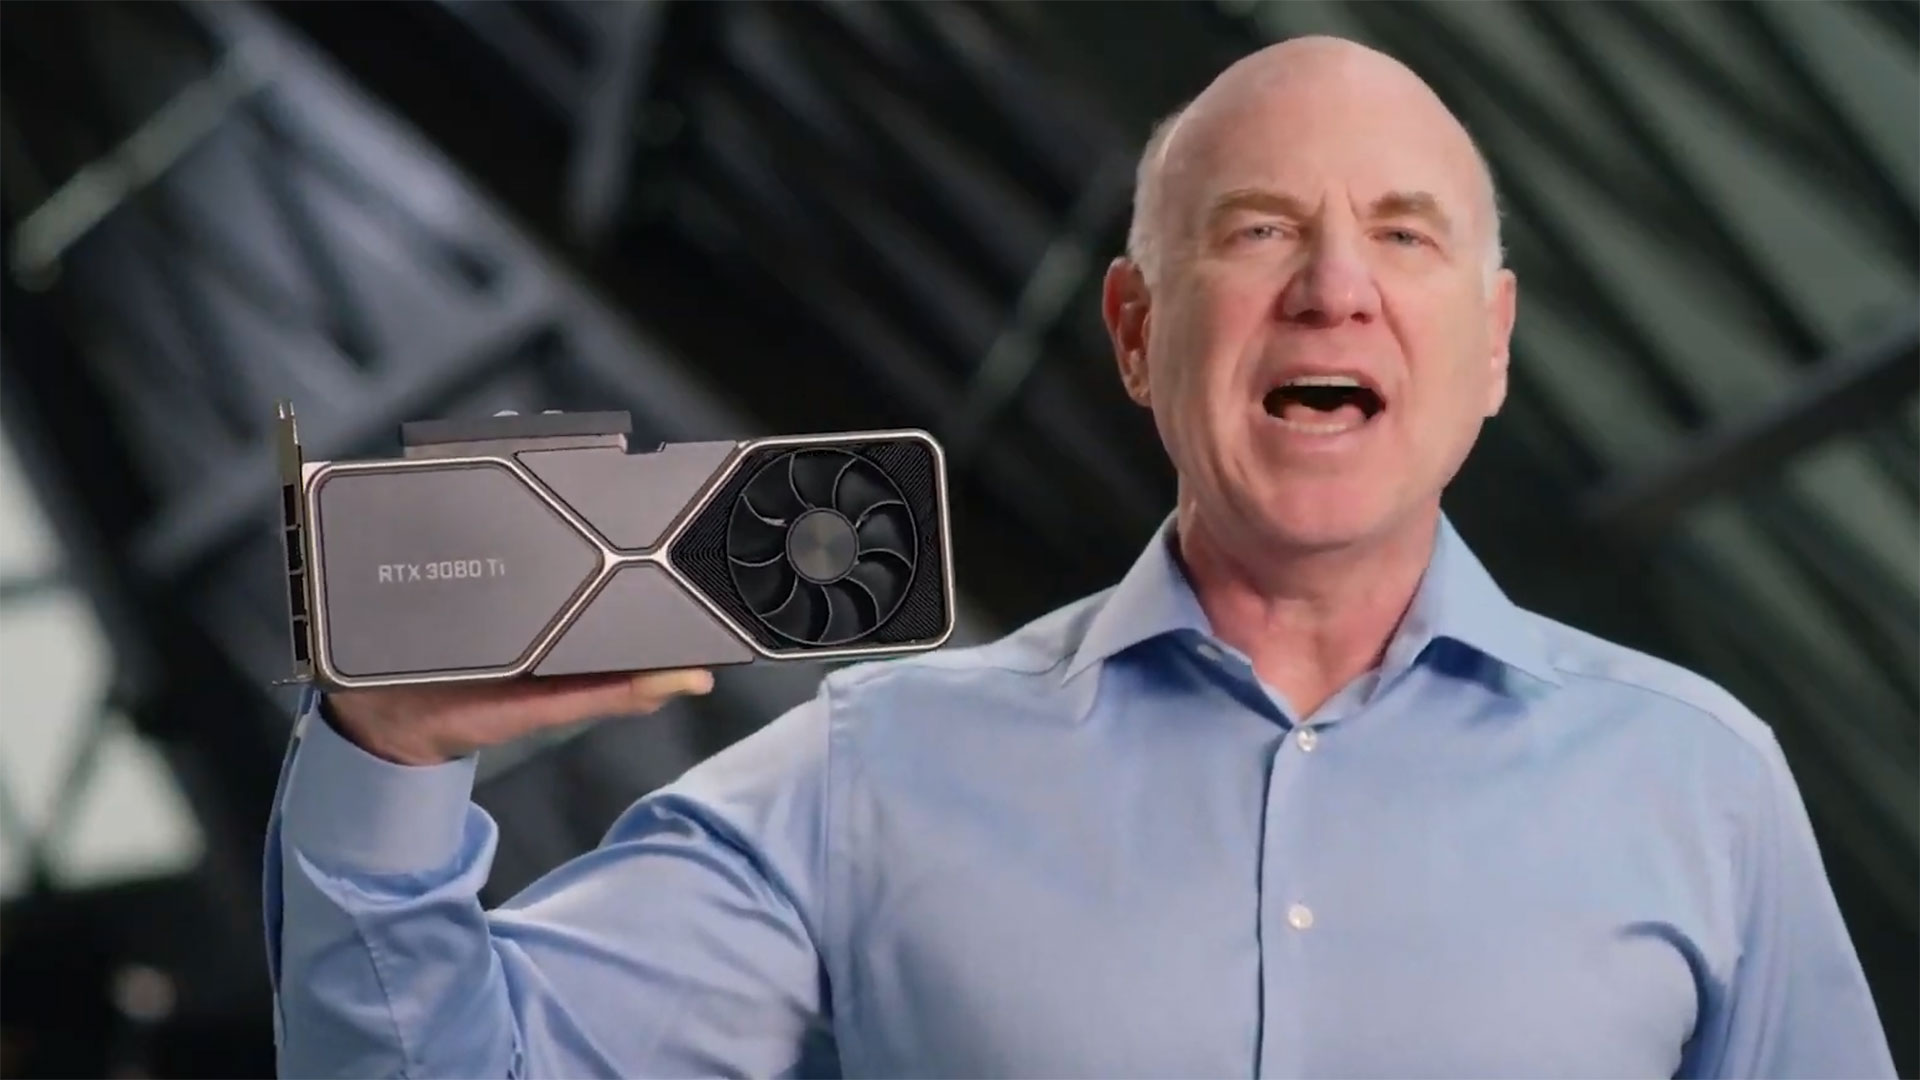 nvidia-reveals-geforce-rtx-3080-ti:-a-3090-with-half-the-vram